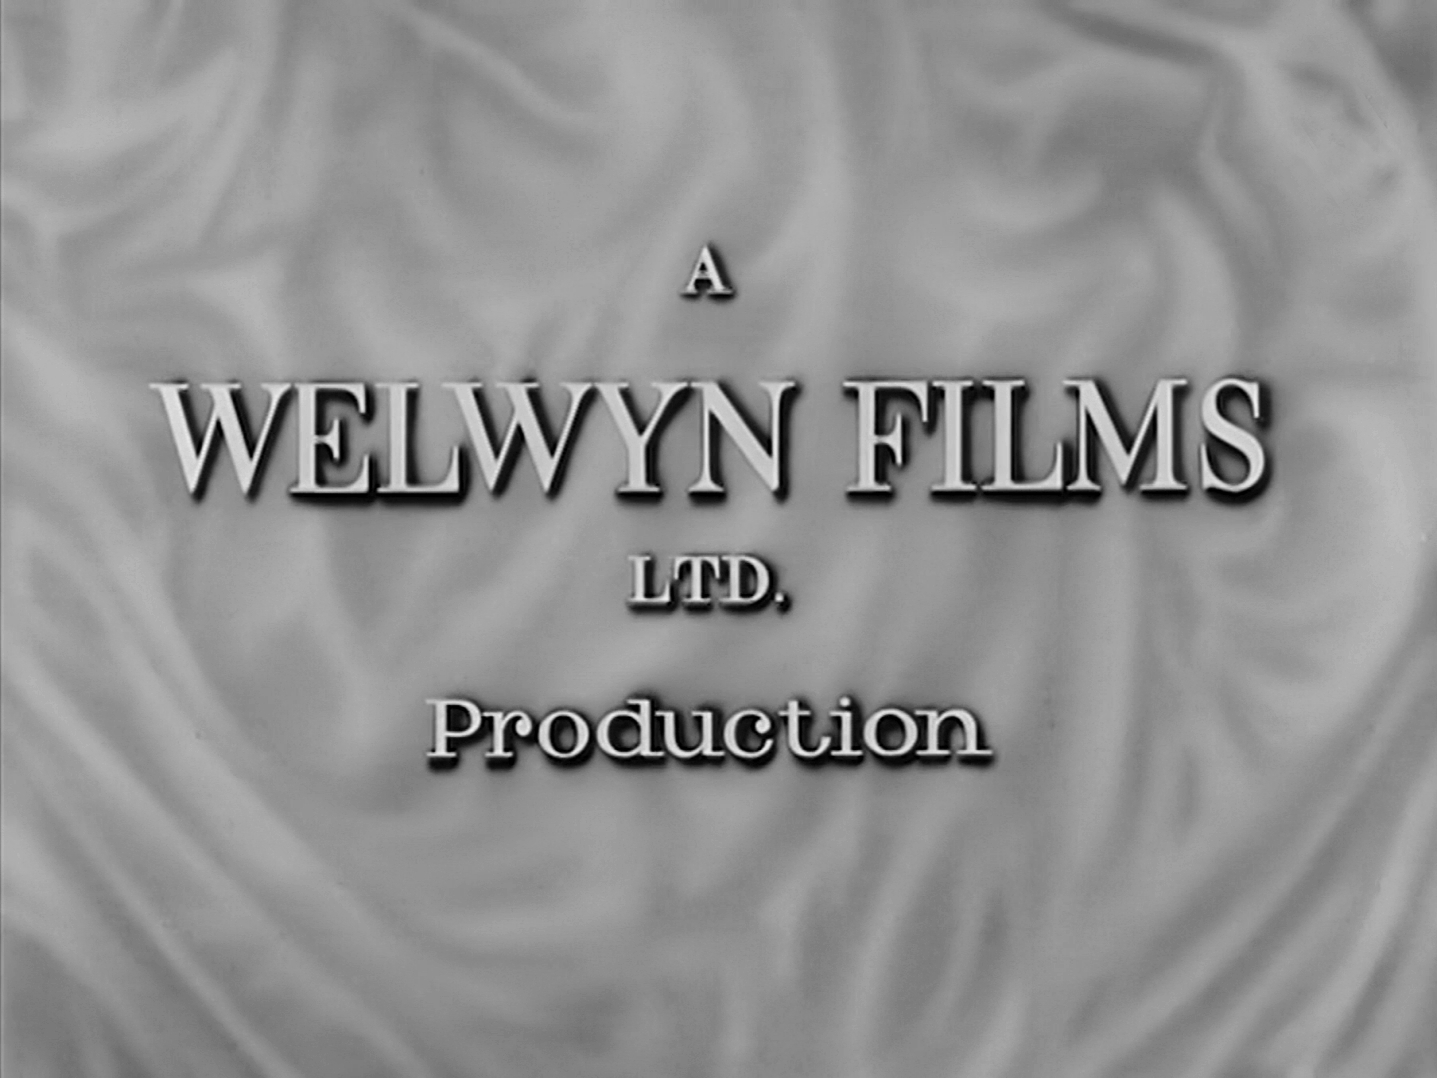 Main title from Small Hotel (1957) (2). A Welwyn Films Ltd production